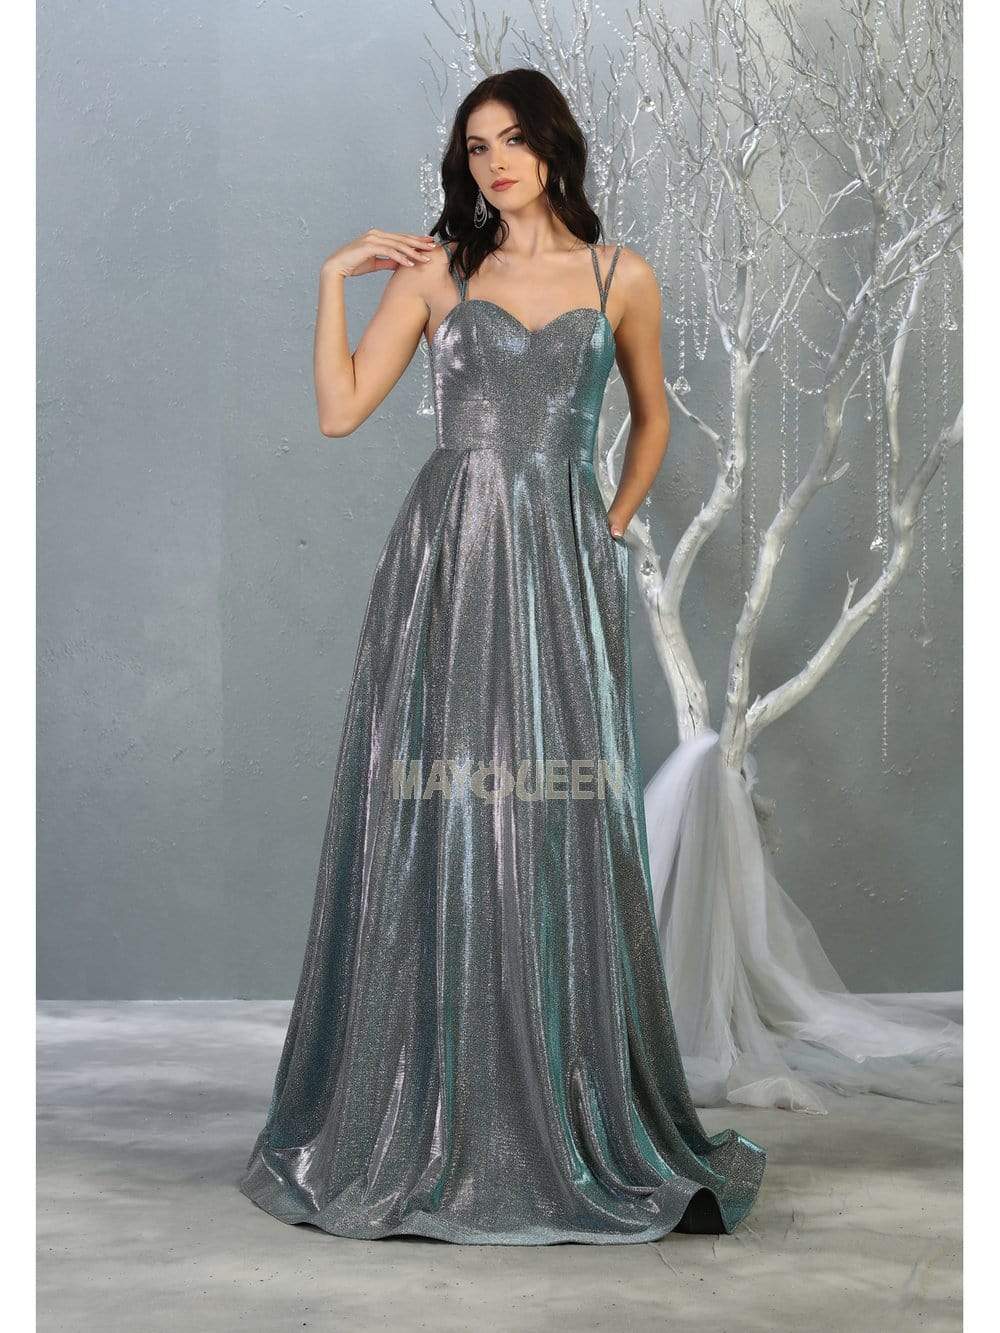 May Queen - MQ1760 Strappy Sweetheart Bodice A-Line Dress Evening Dresses 4 / Dusty Green